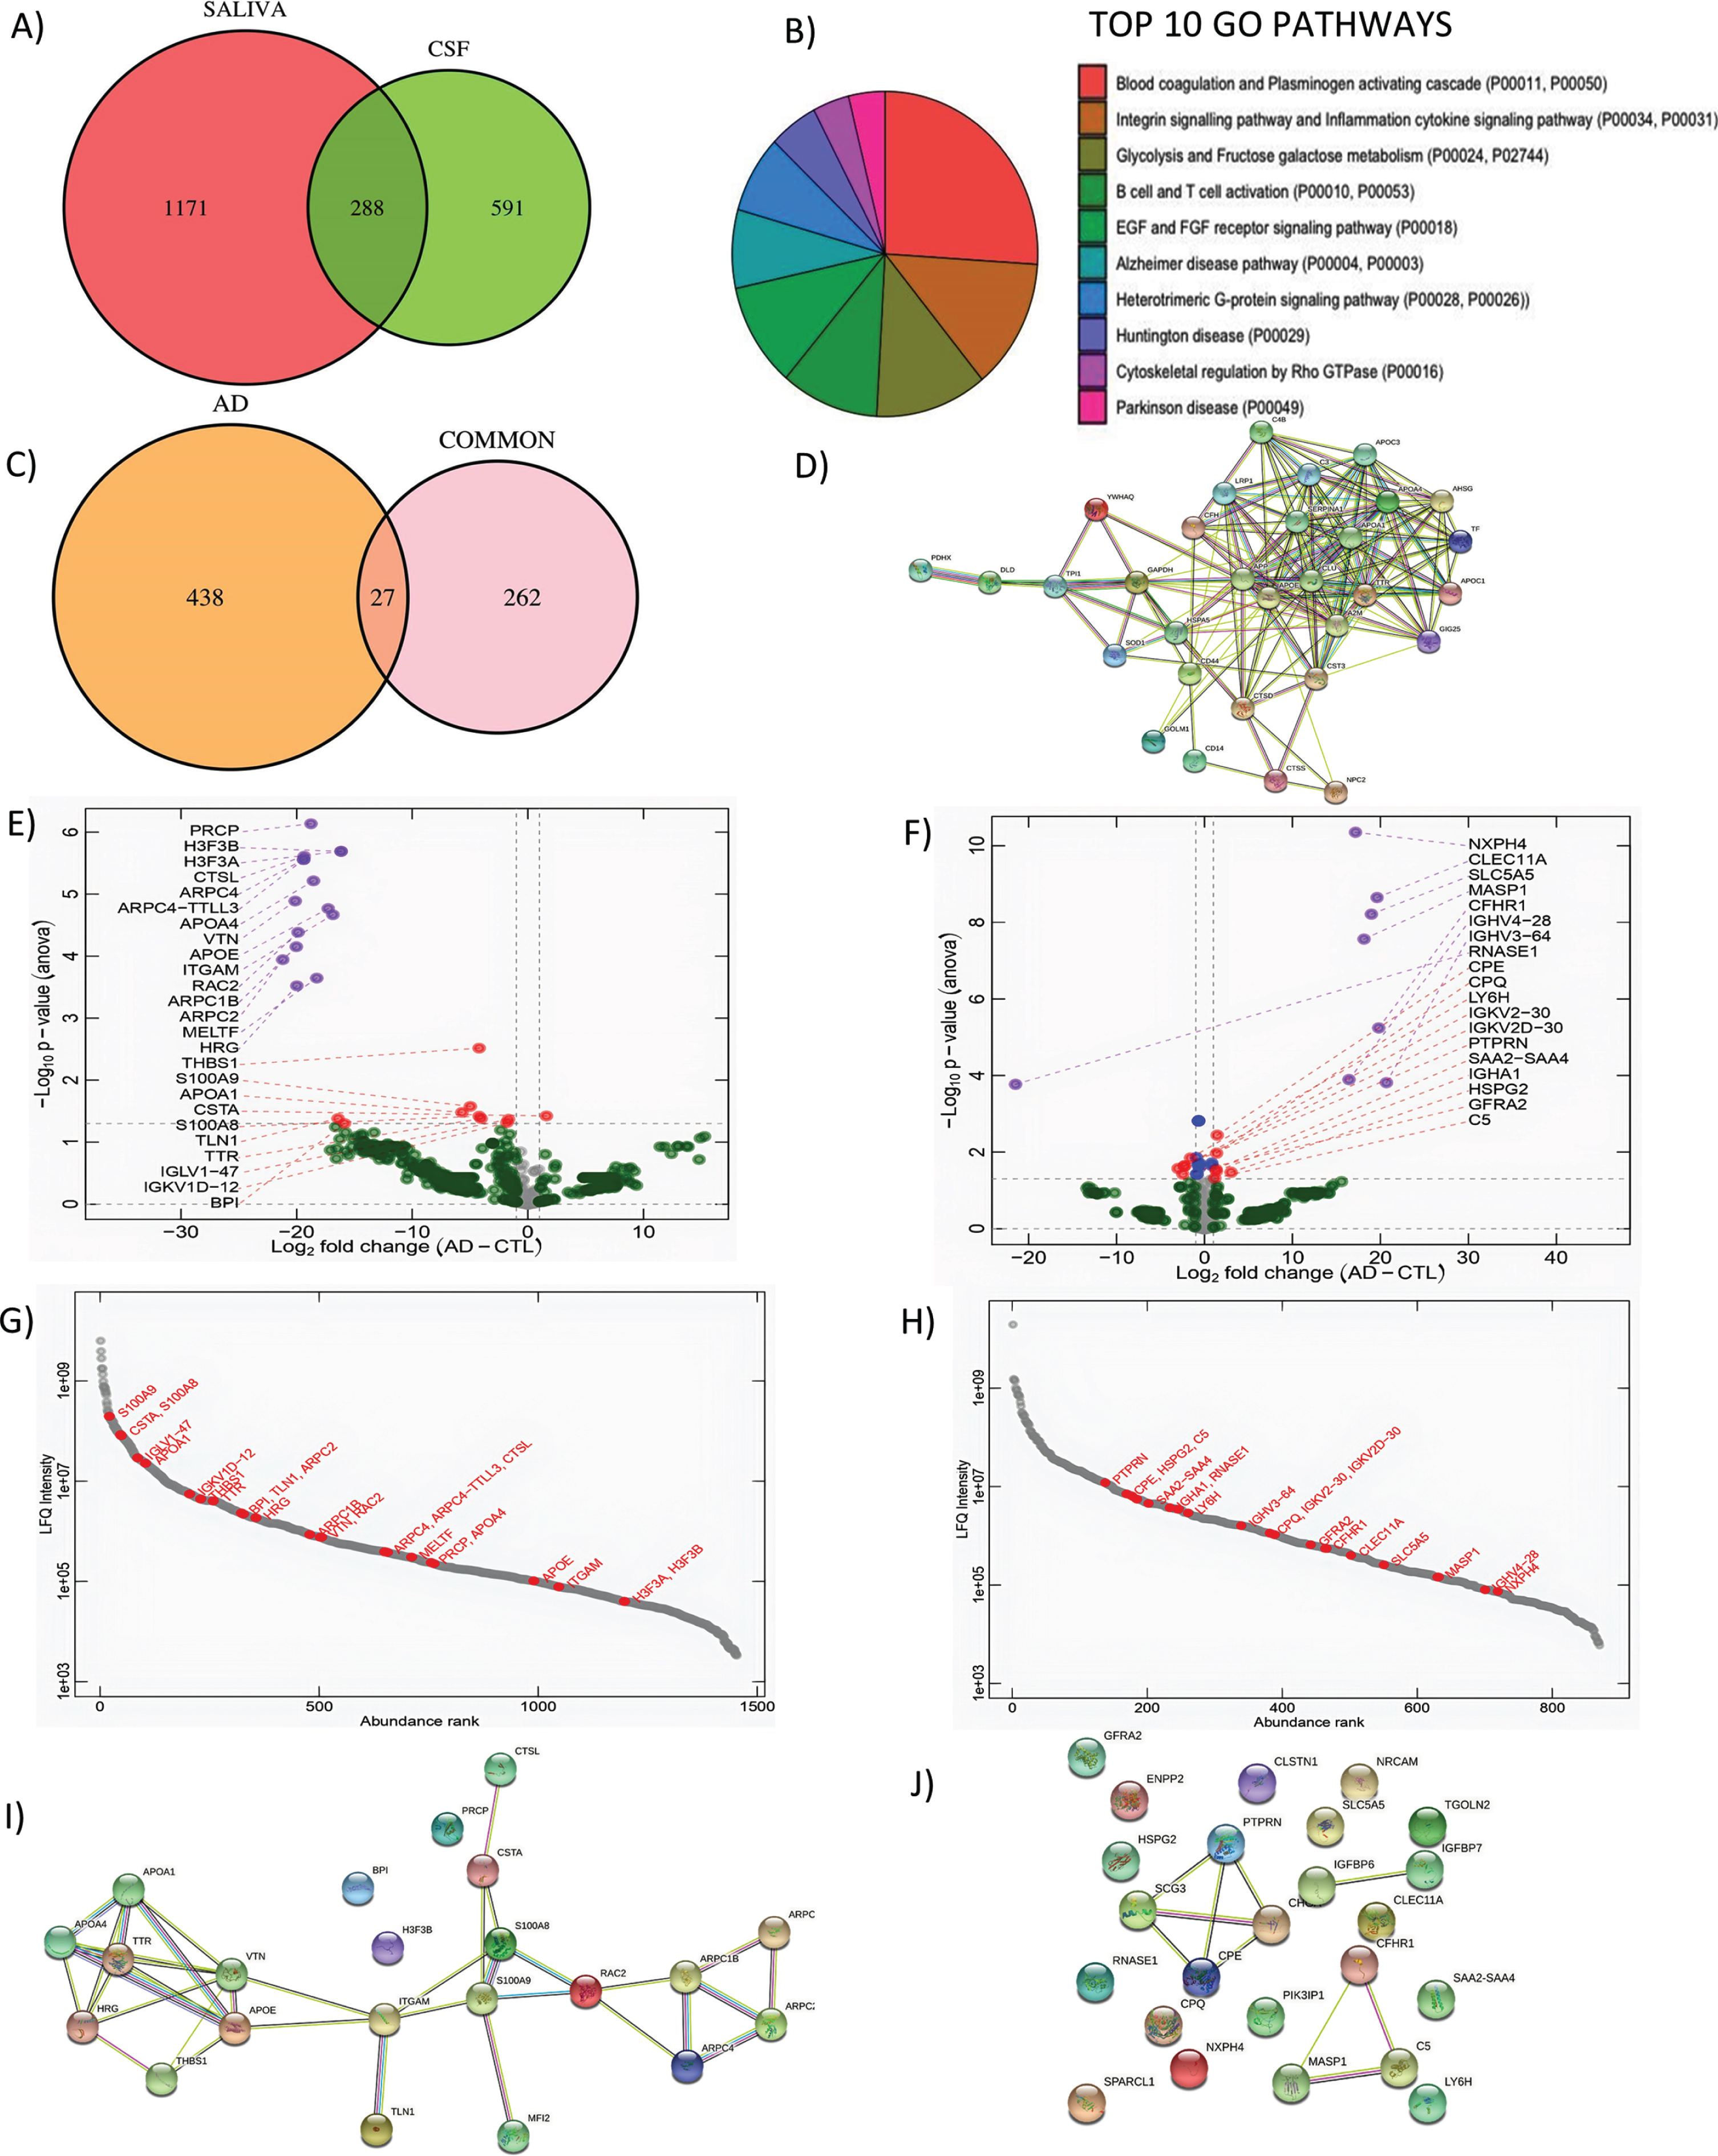 Shotgun proteomics to compare saliva and CSF and correlation analysis of differentially expressed genes in saliva. A) GO Biological pathways for salivary proteins. B) Number of shared proteins between saliva and CSF. C) Number of shared hits between common proteins and AD related proteins. D) STRING map shows the functional association based on the string database indicating the interactome of commonly shared proteins in saliva and CSF with AD. E) Volcano plots showing differential expression in saliva and F) CSF between AD and CN. G) Abundance rank dot plots for saliva and H) CSF shows the range of expression levels for the differentially expressed proteins. I) STRING map shows the interaction of differentially expressed proteins in saliva and J) in CSF. In the STRING map, the pink line represents the known interaction that is experimentally determined, blue line represents the known interaction from curated databases, green line represents predicted interaction due to gene neighborhood, red line represents prediction due to gene fusions and dark blue line represents prediction due to gene co-occurrence.